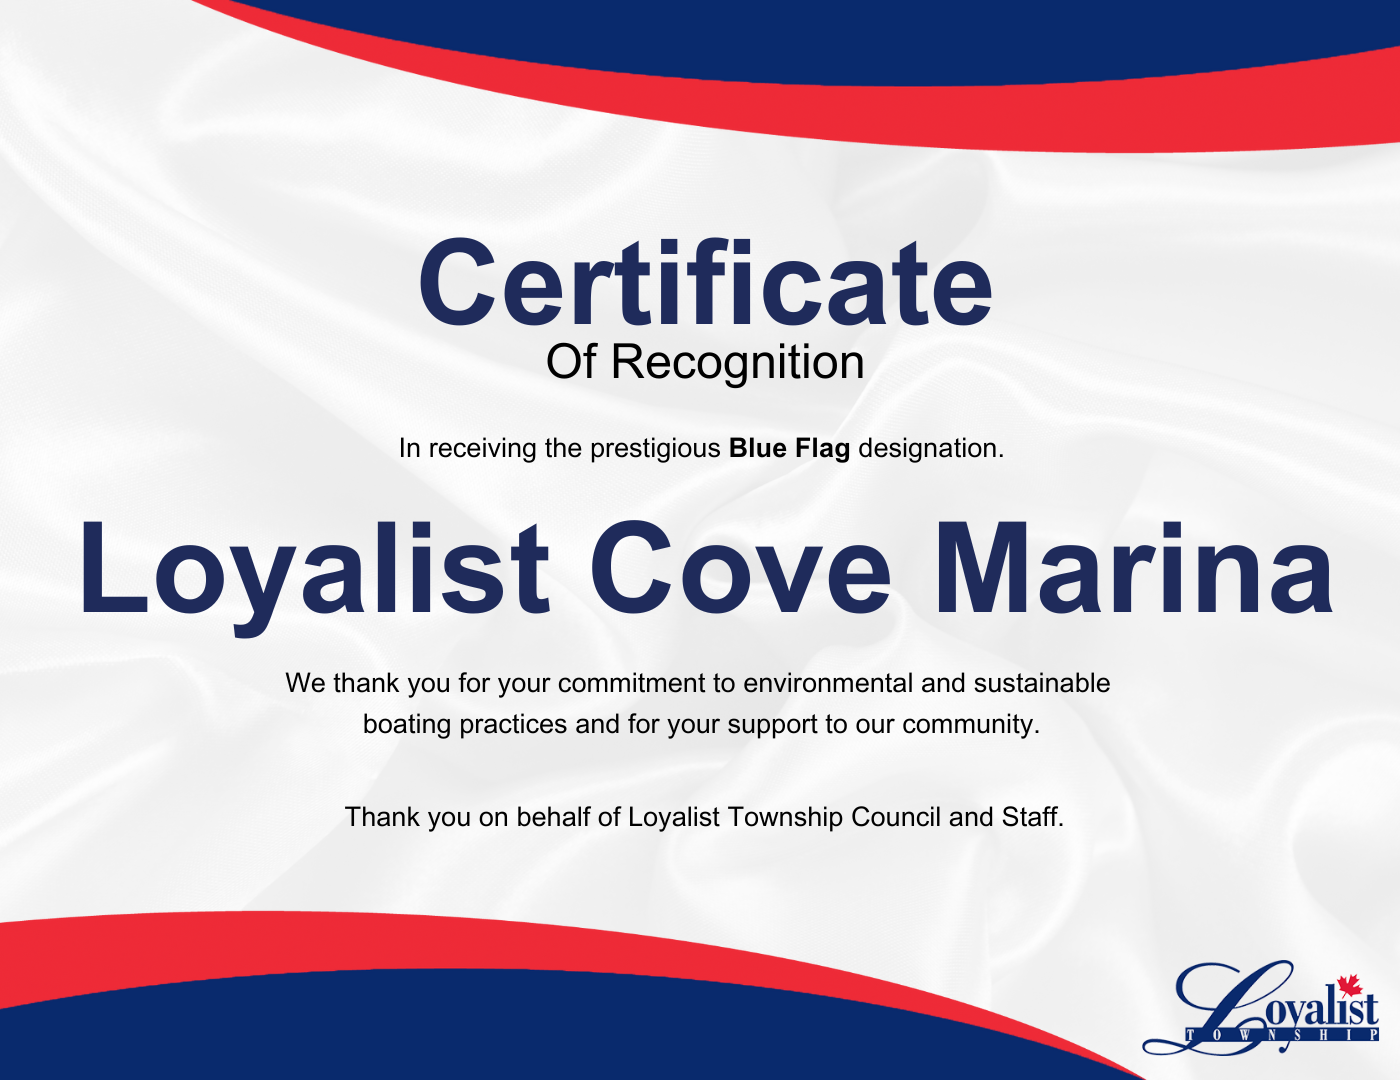 Loyalist Cove Marina certificate of recognition.